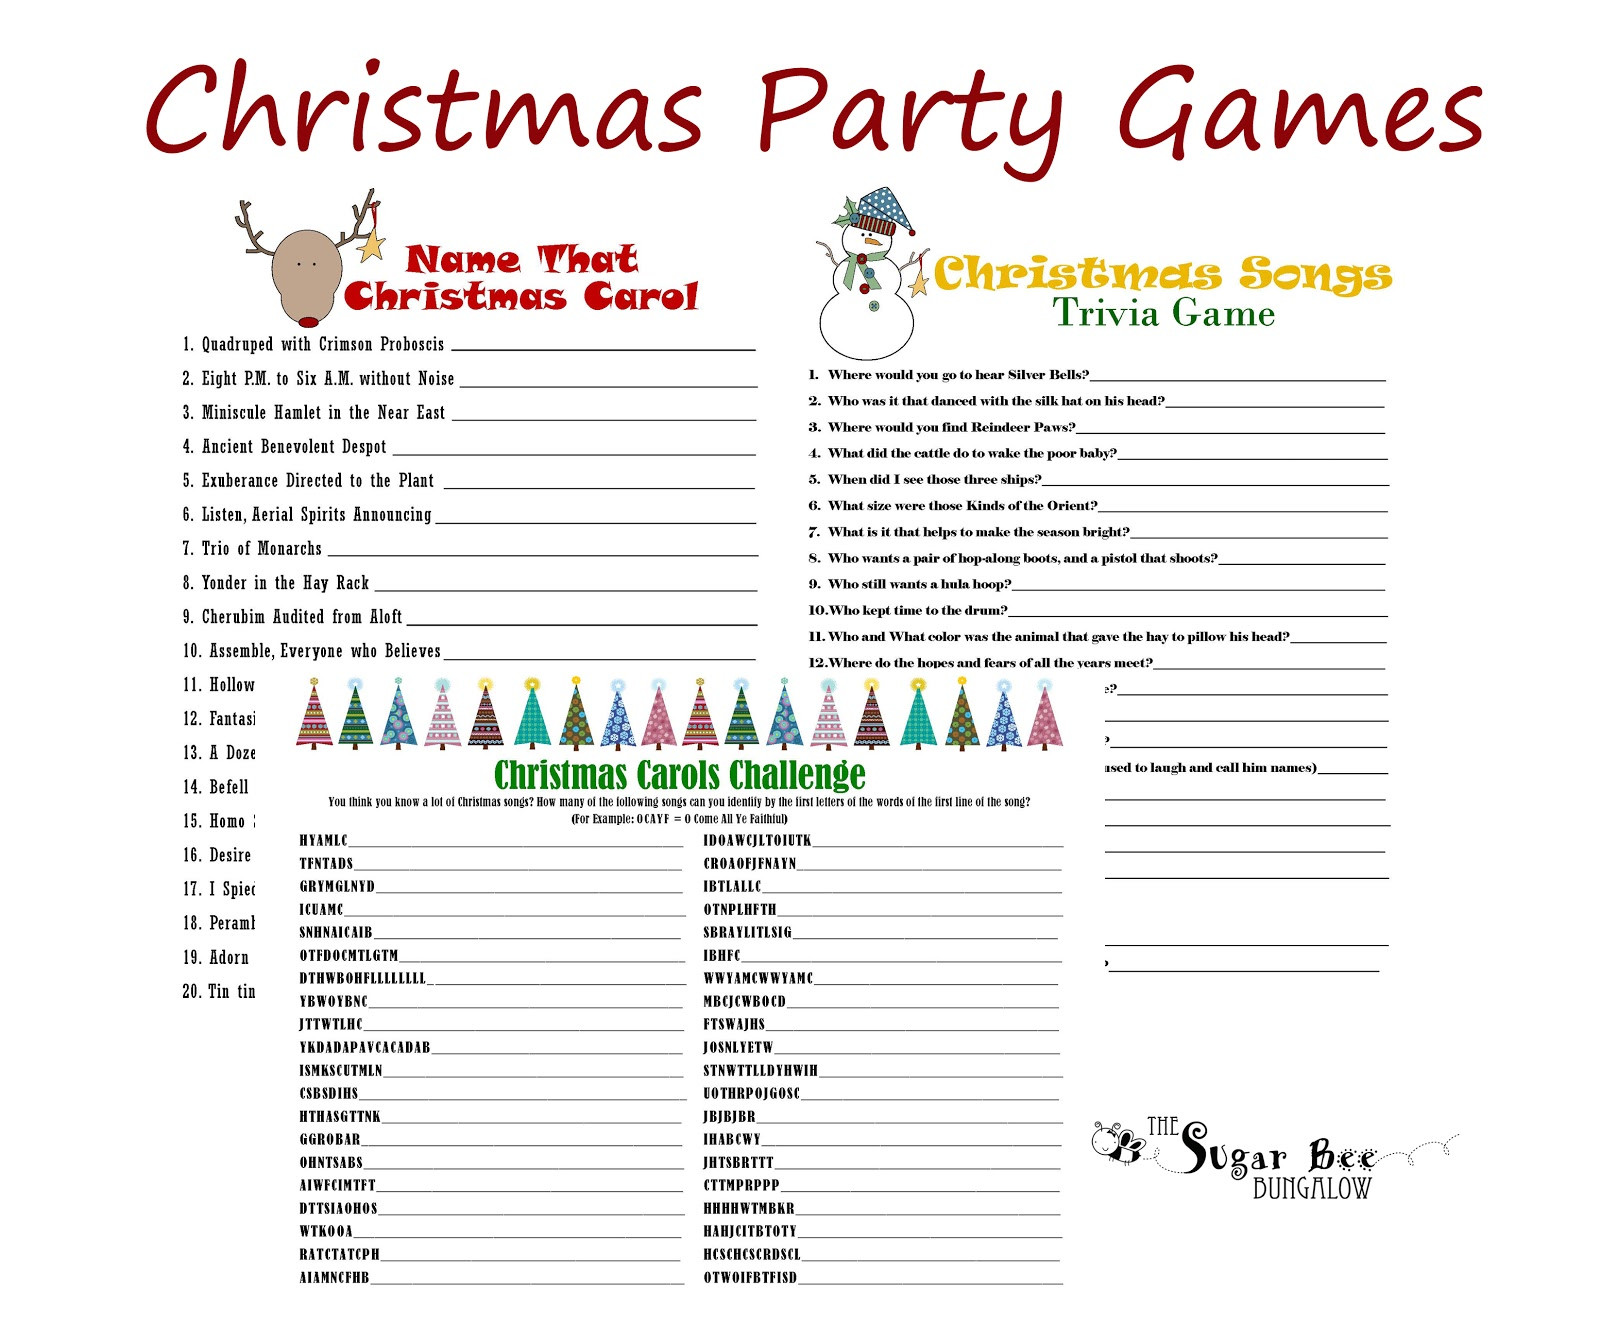 Holiday Office Party Game Ideas
 The Sugar Bee Bungalow December 2012